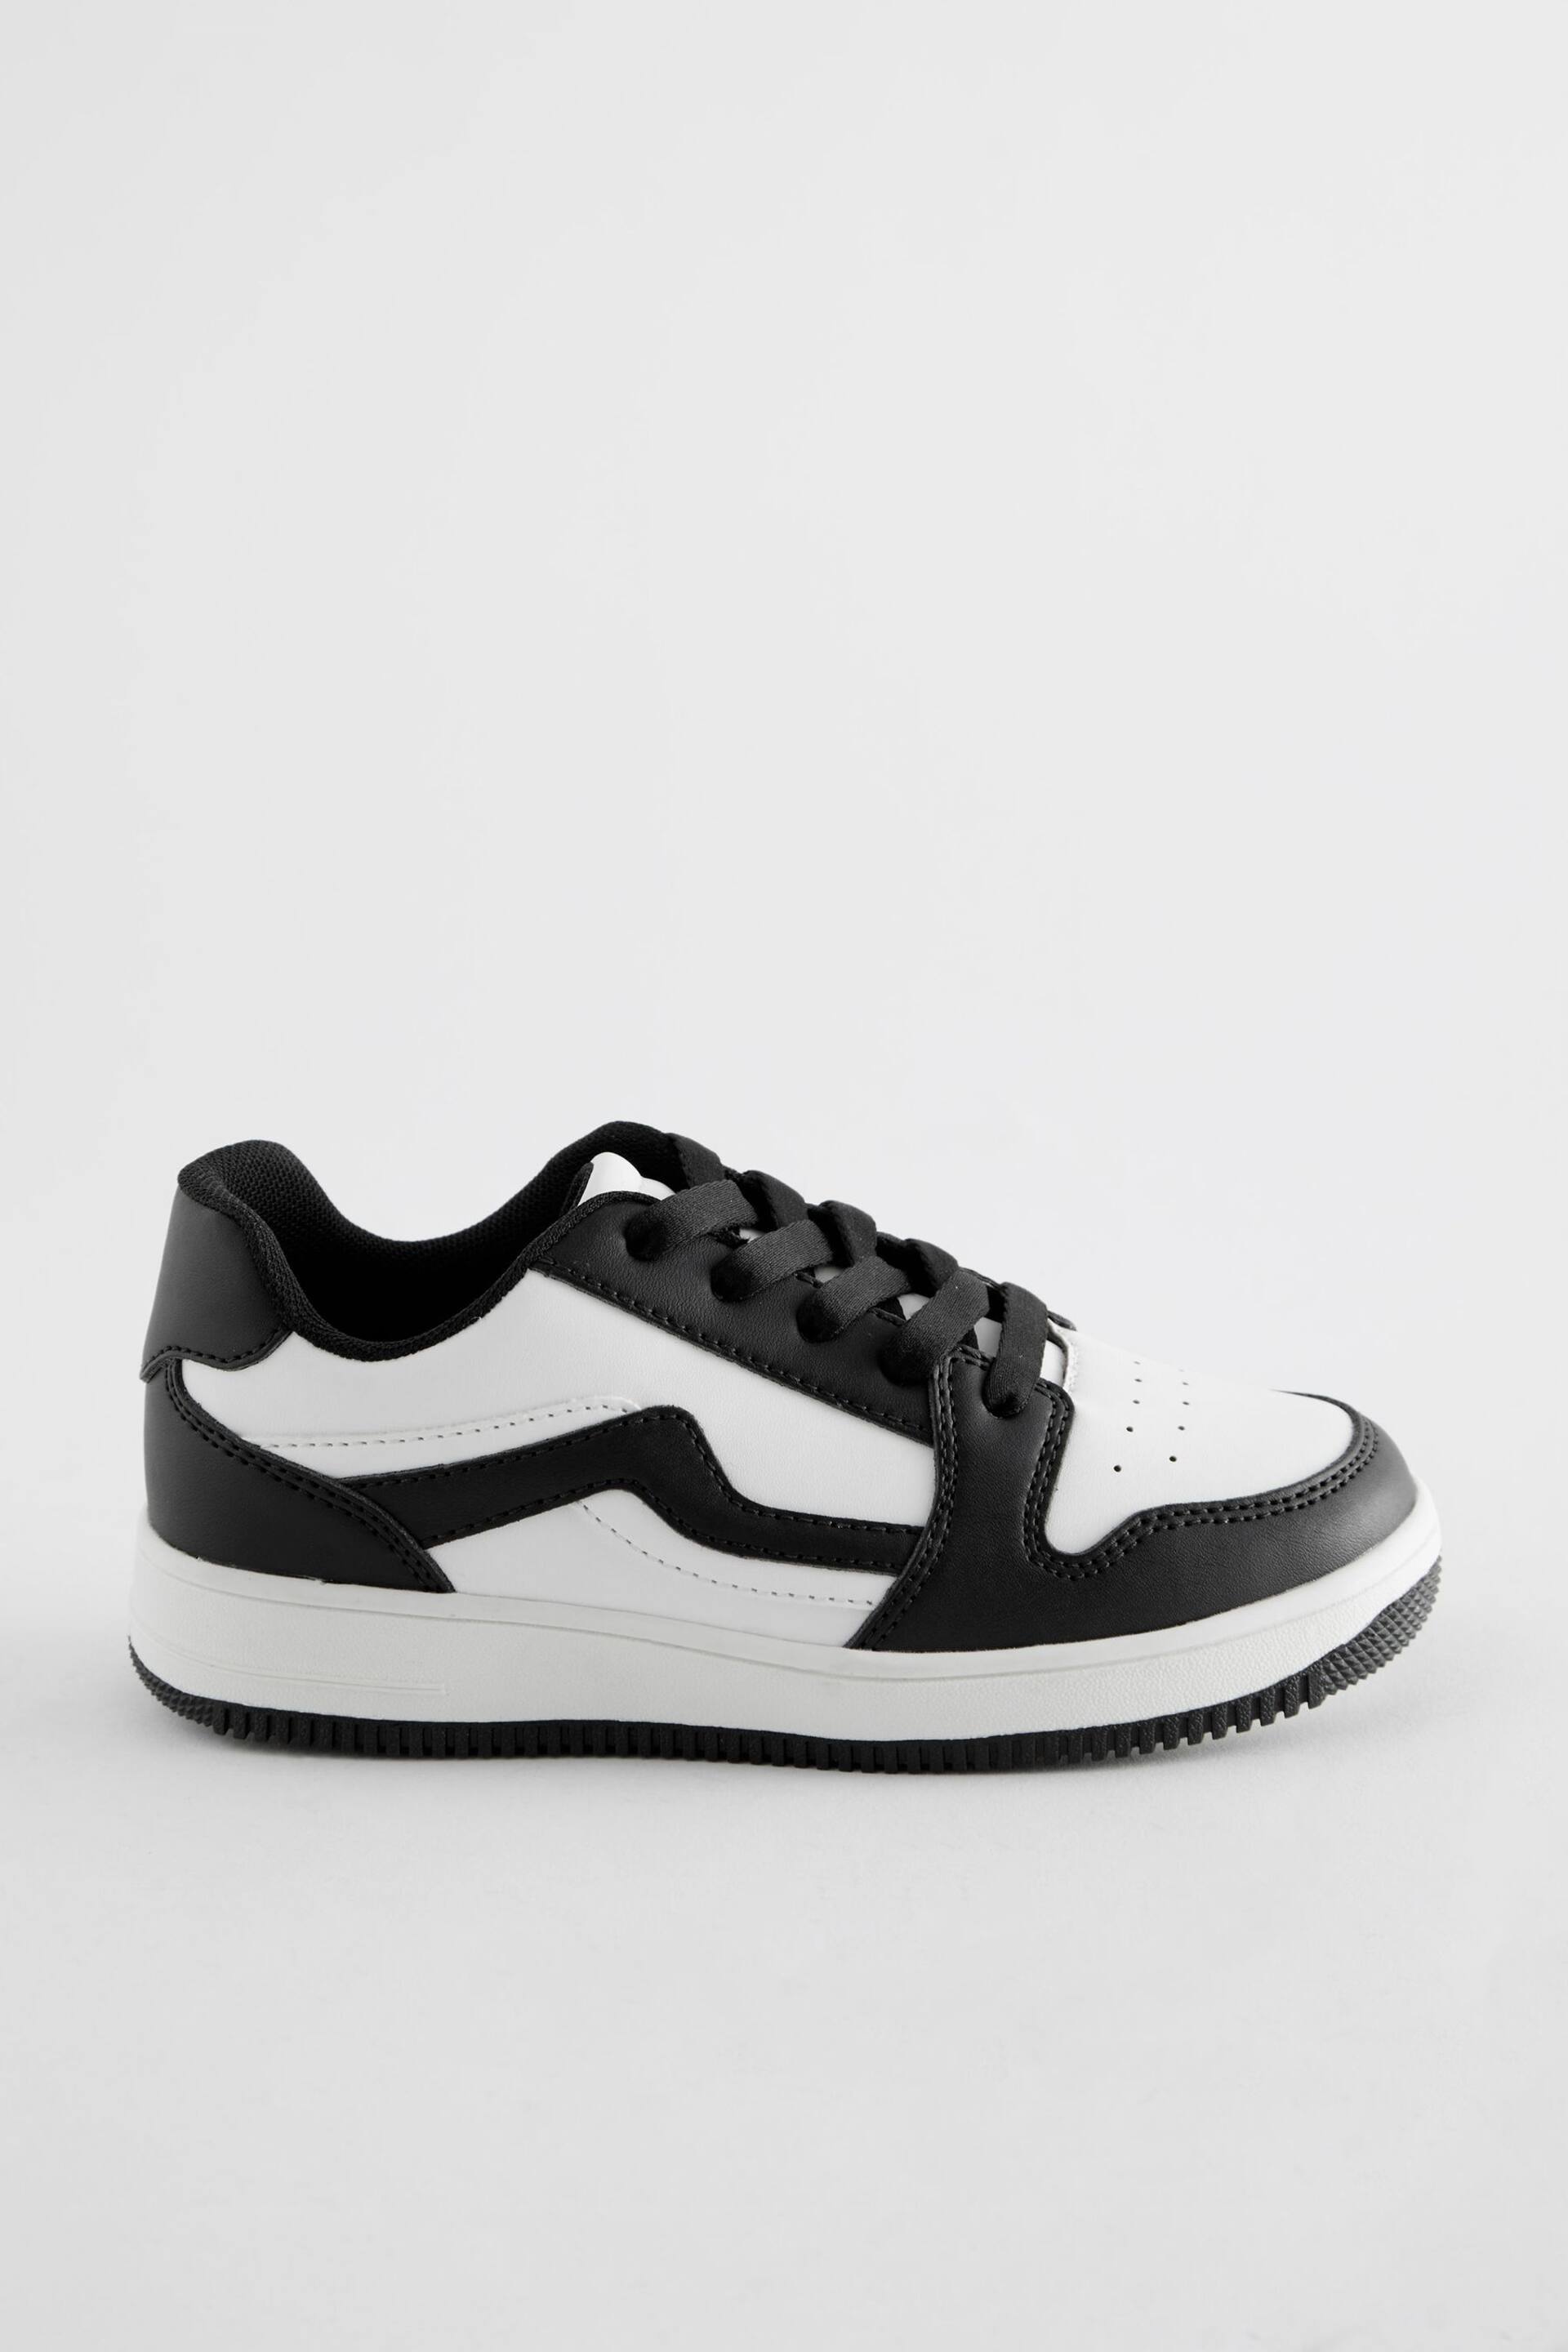 White/ Black Lace-Up Trainers - Image 5 of 8